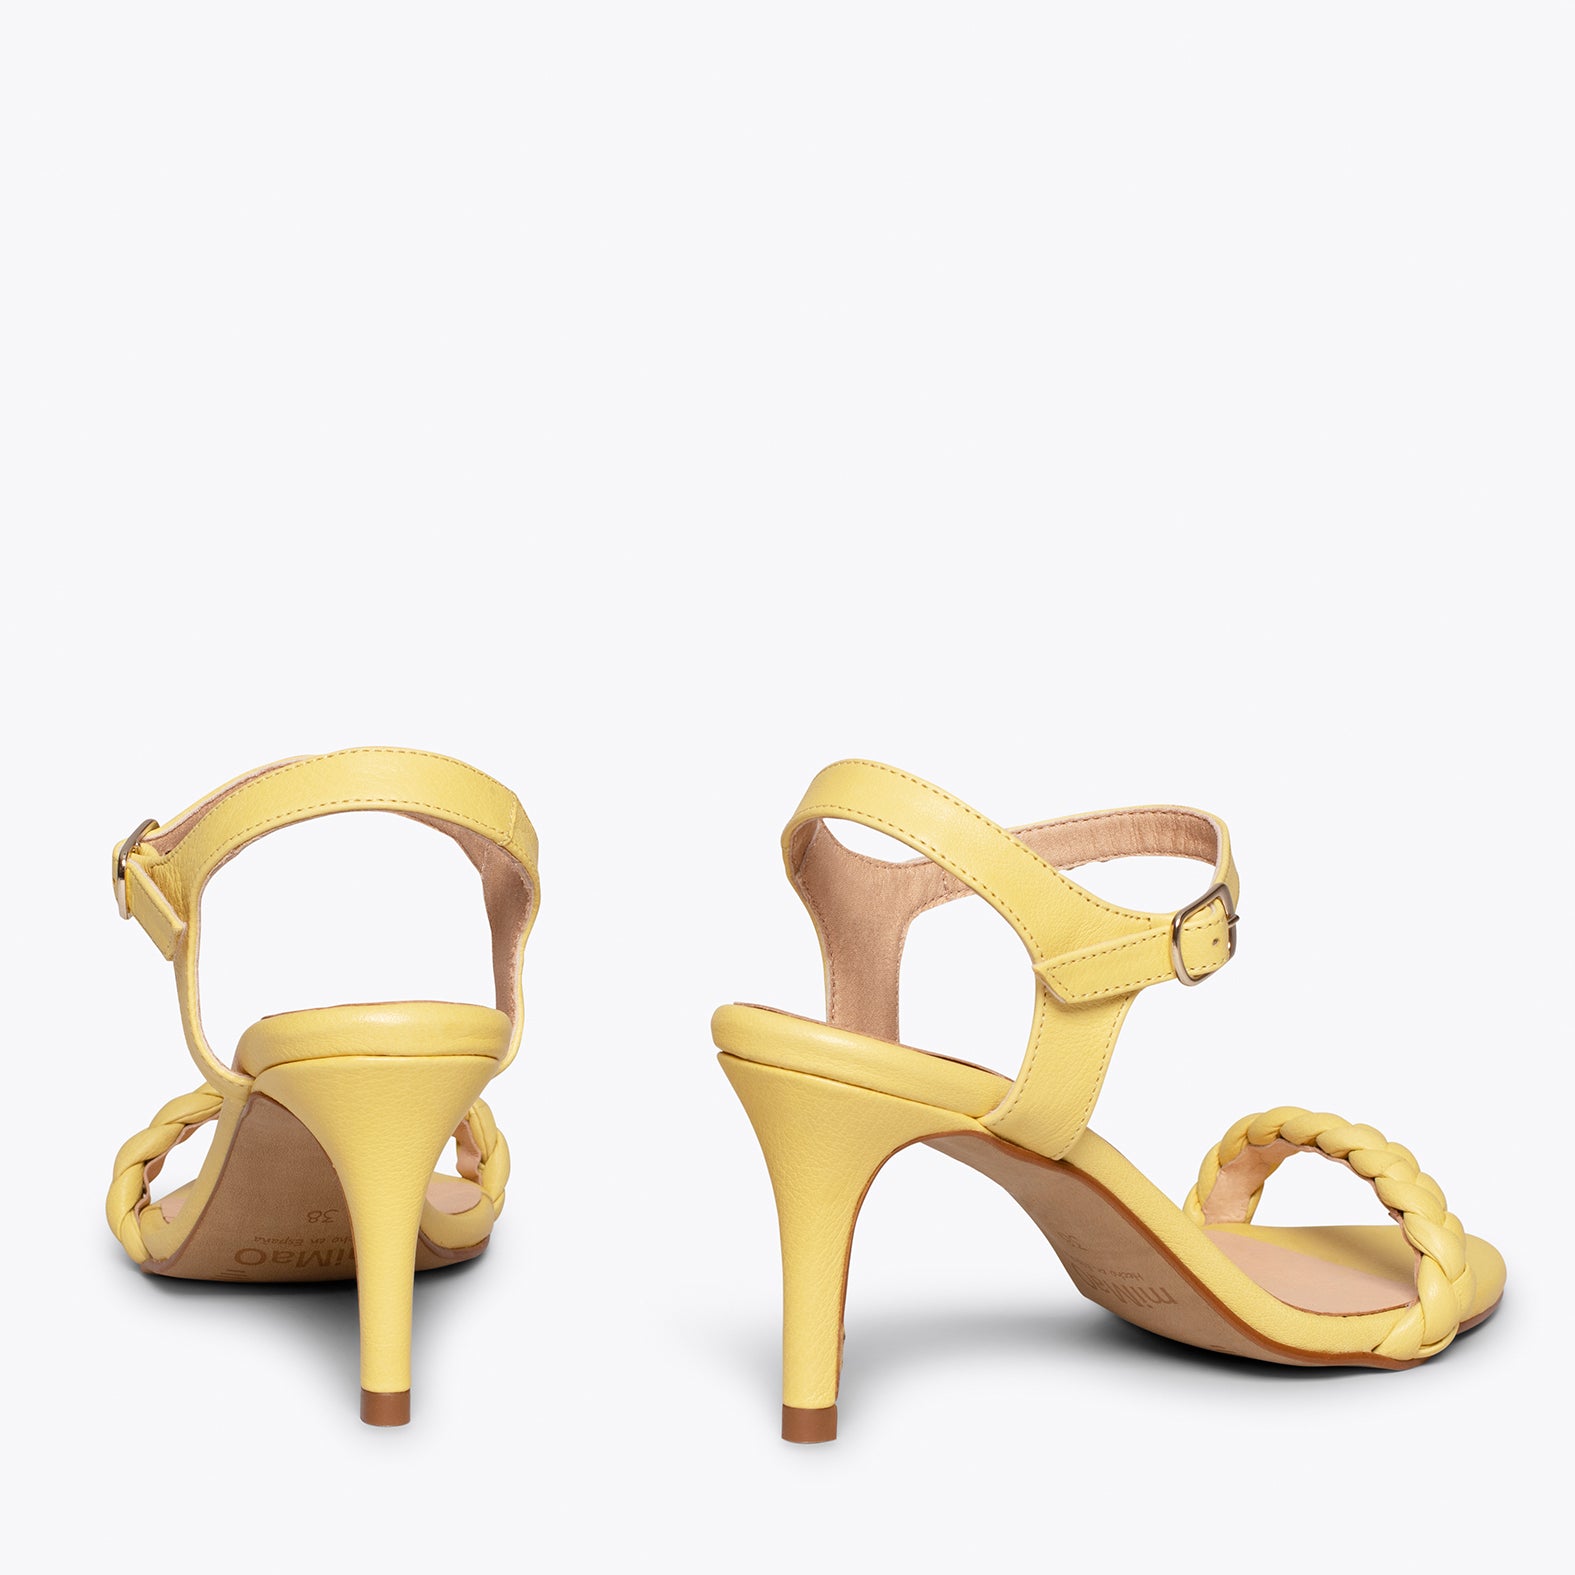 SUNSET – YELLOW elegant sandals with a braided strap